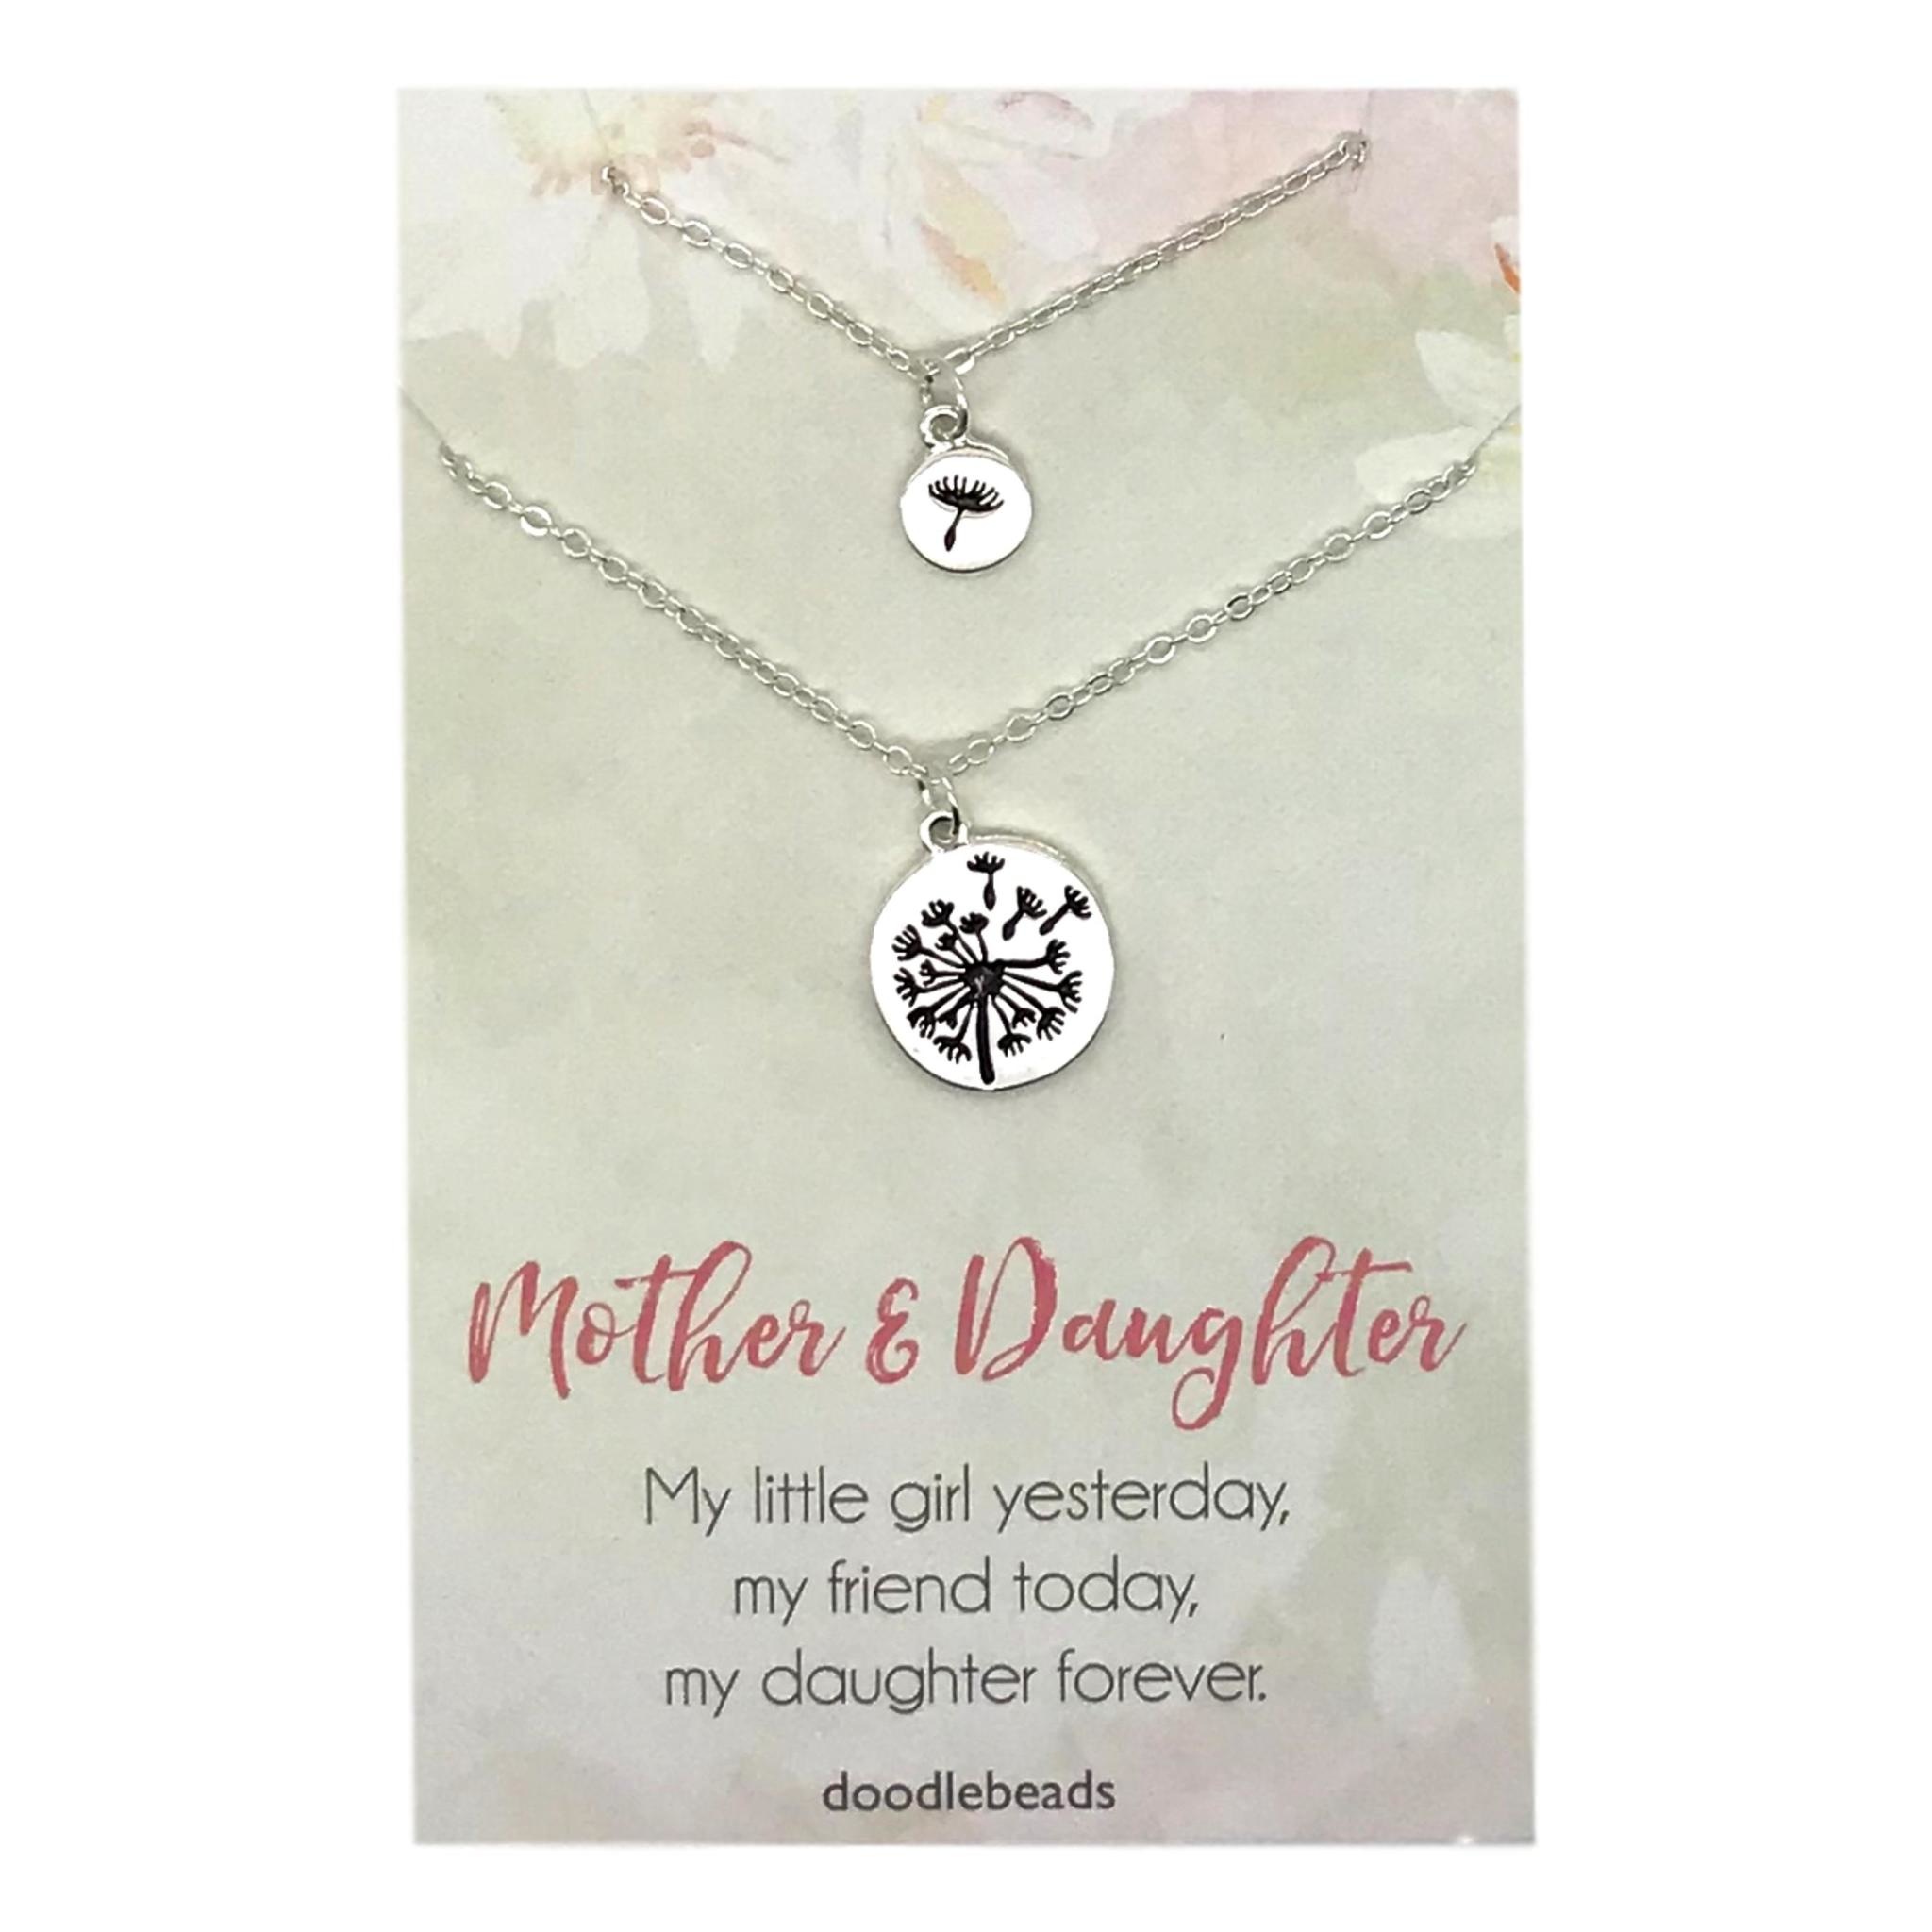 My daughter forever. Mother daughter Necklace. Подвеска кулон Merry Christmas Wish Necklace. Dandelion daughter.